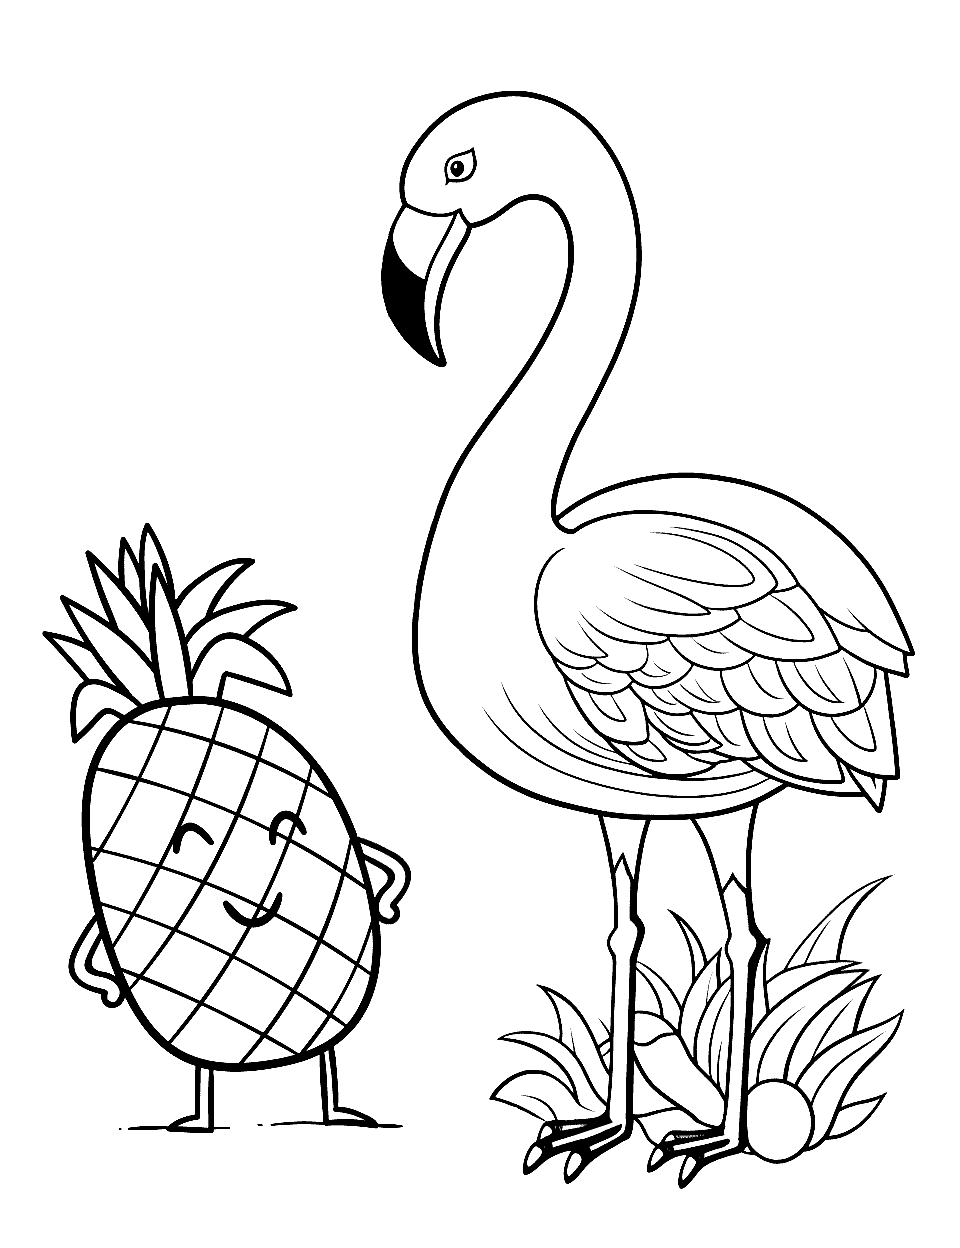 Flamingo and Pineapple Friends Coloring Page - A whimsical scene featuring a flamingo standing next to a standing pineapple.